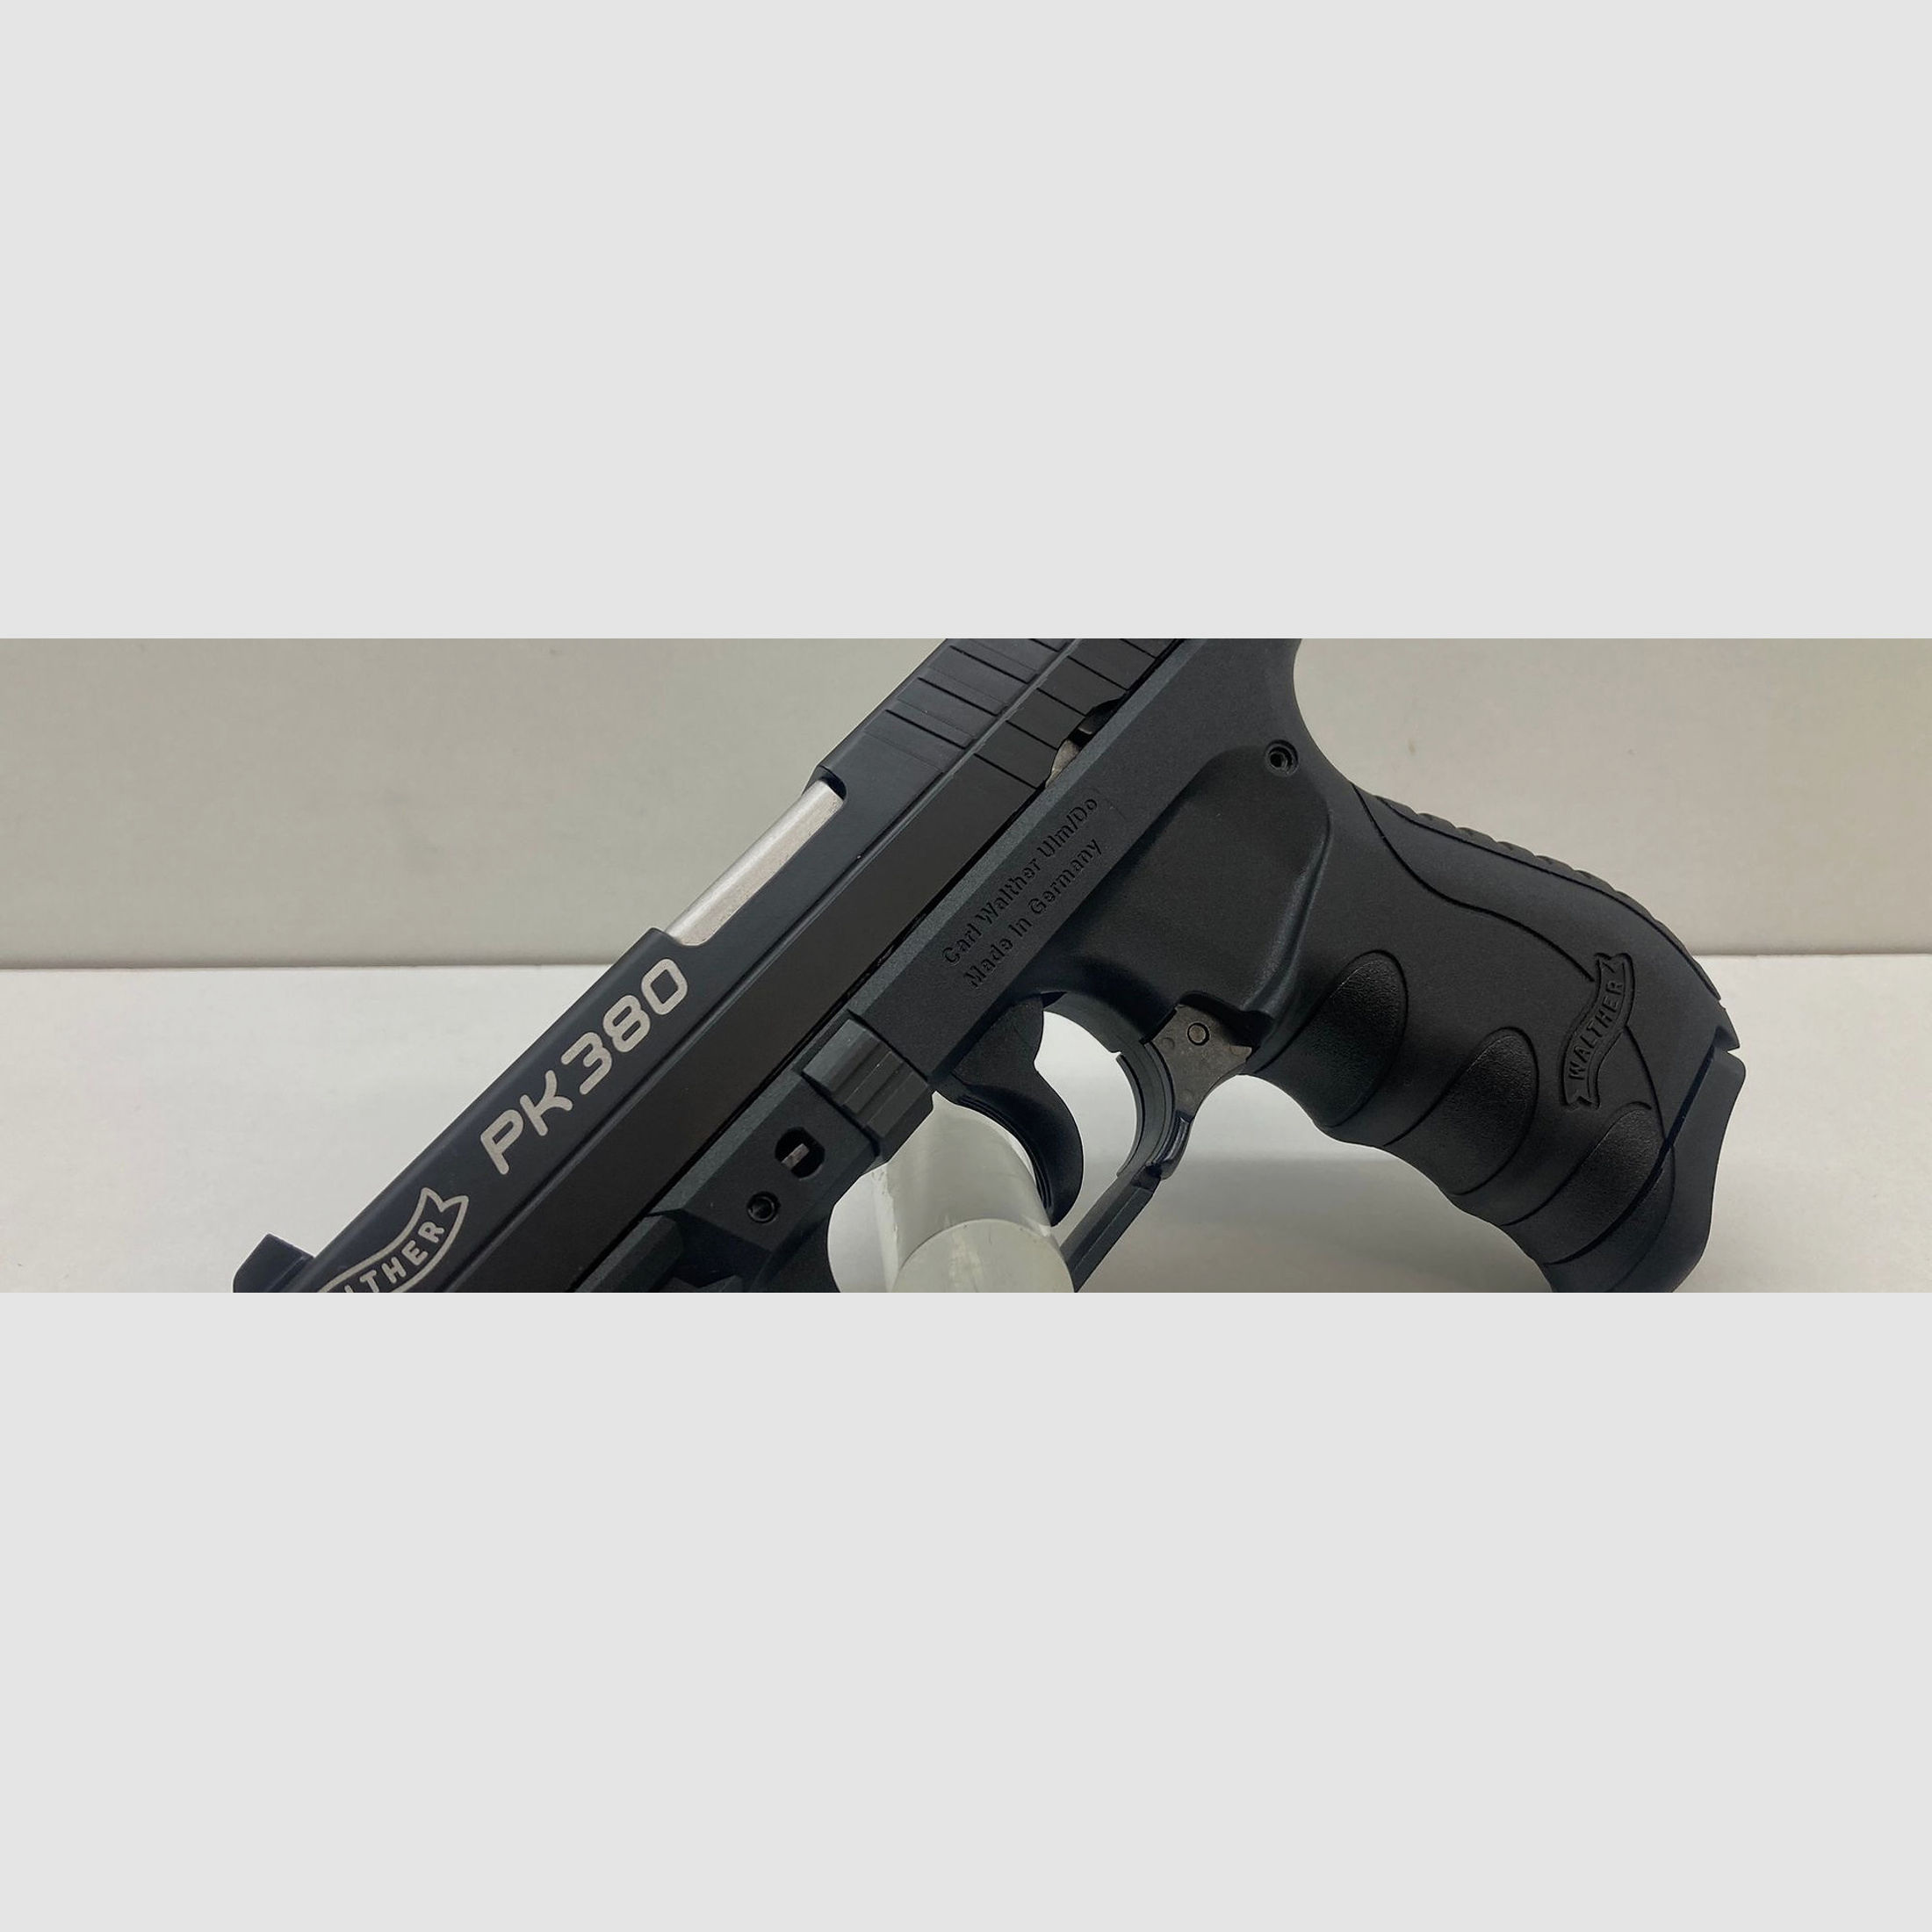 WALTHER PK380